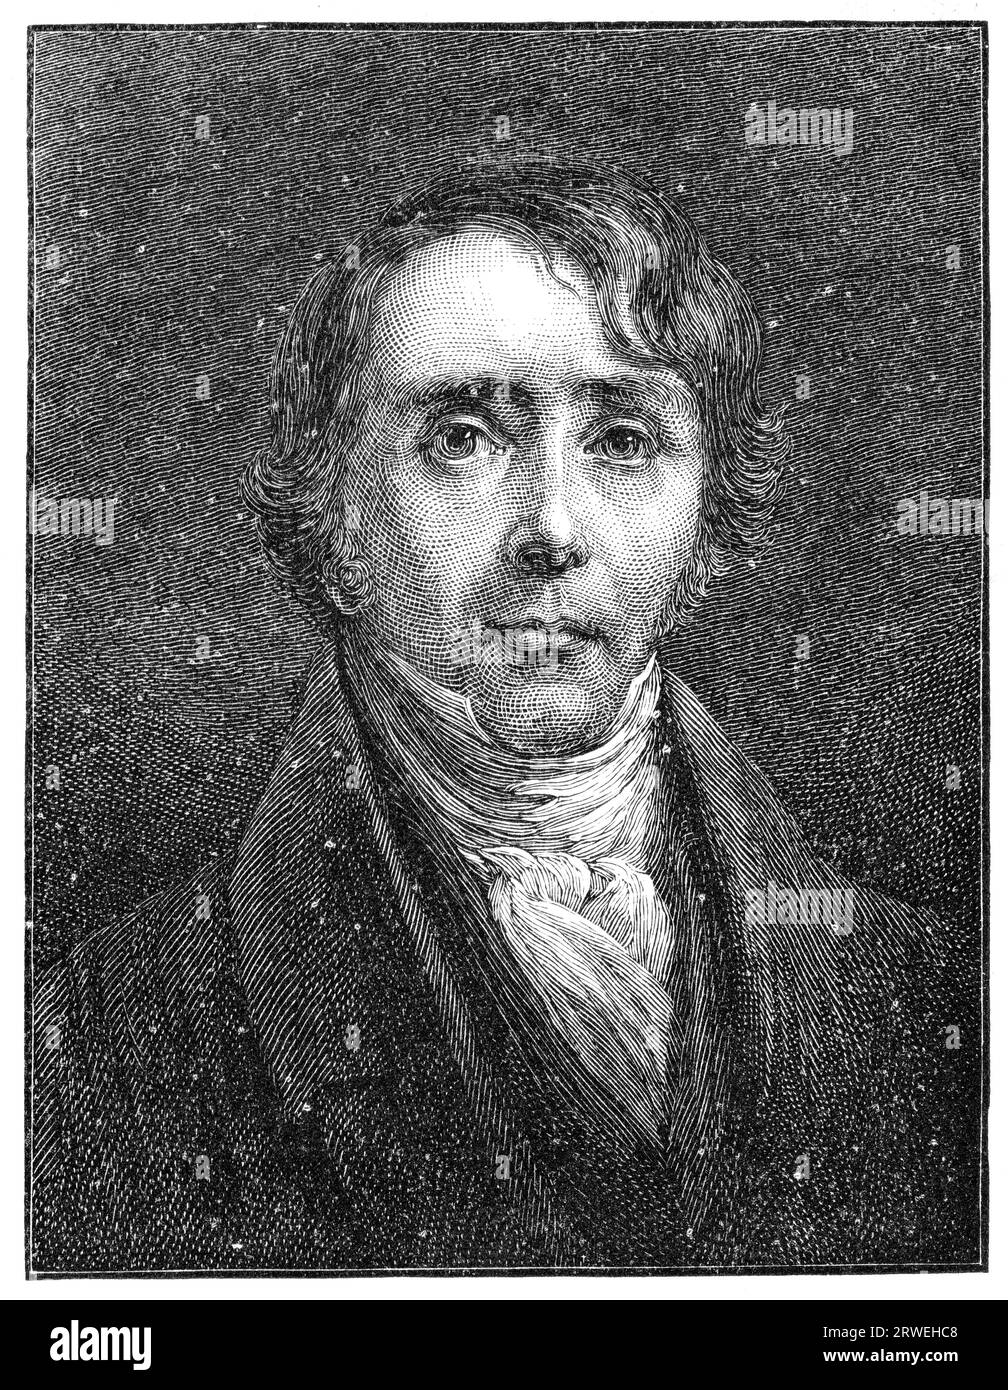 Dr. William Ellery Channing (1780-1842) was the foremost Unitarian preacher in the United States in the early nineteenth century and, along with Stock Photo